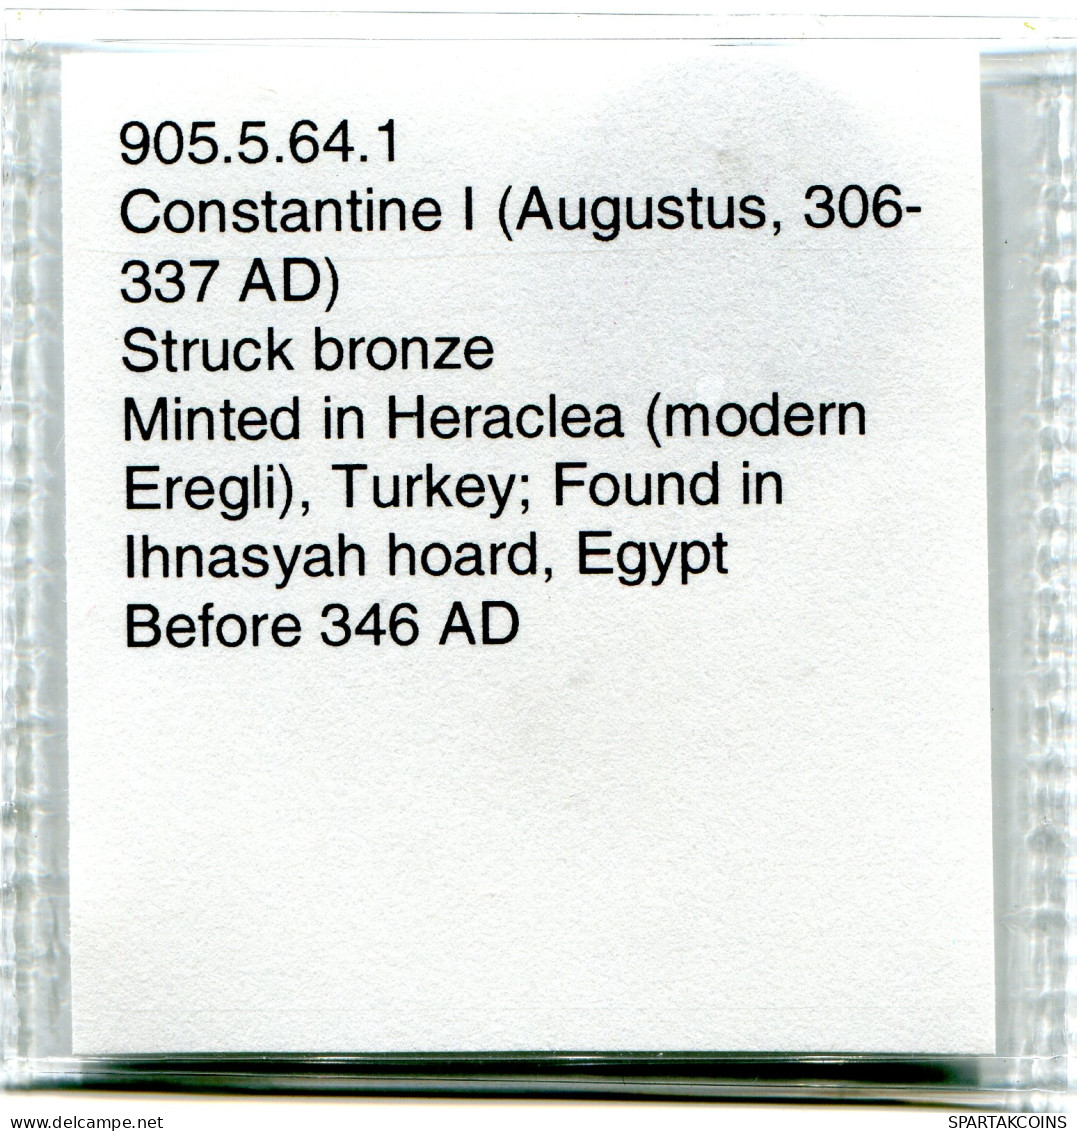 CONSTANTINE I MINTED IN HERACLEA FOUND IN IHNASYAH HOARD EGYPT #ANC11196.14.F.A - The Christian Empire (307 AD Tot 363 AD)